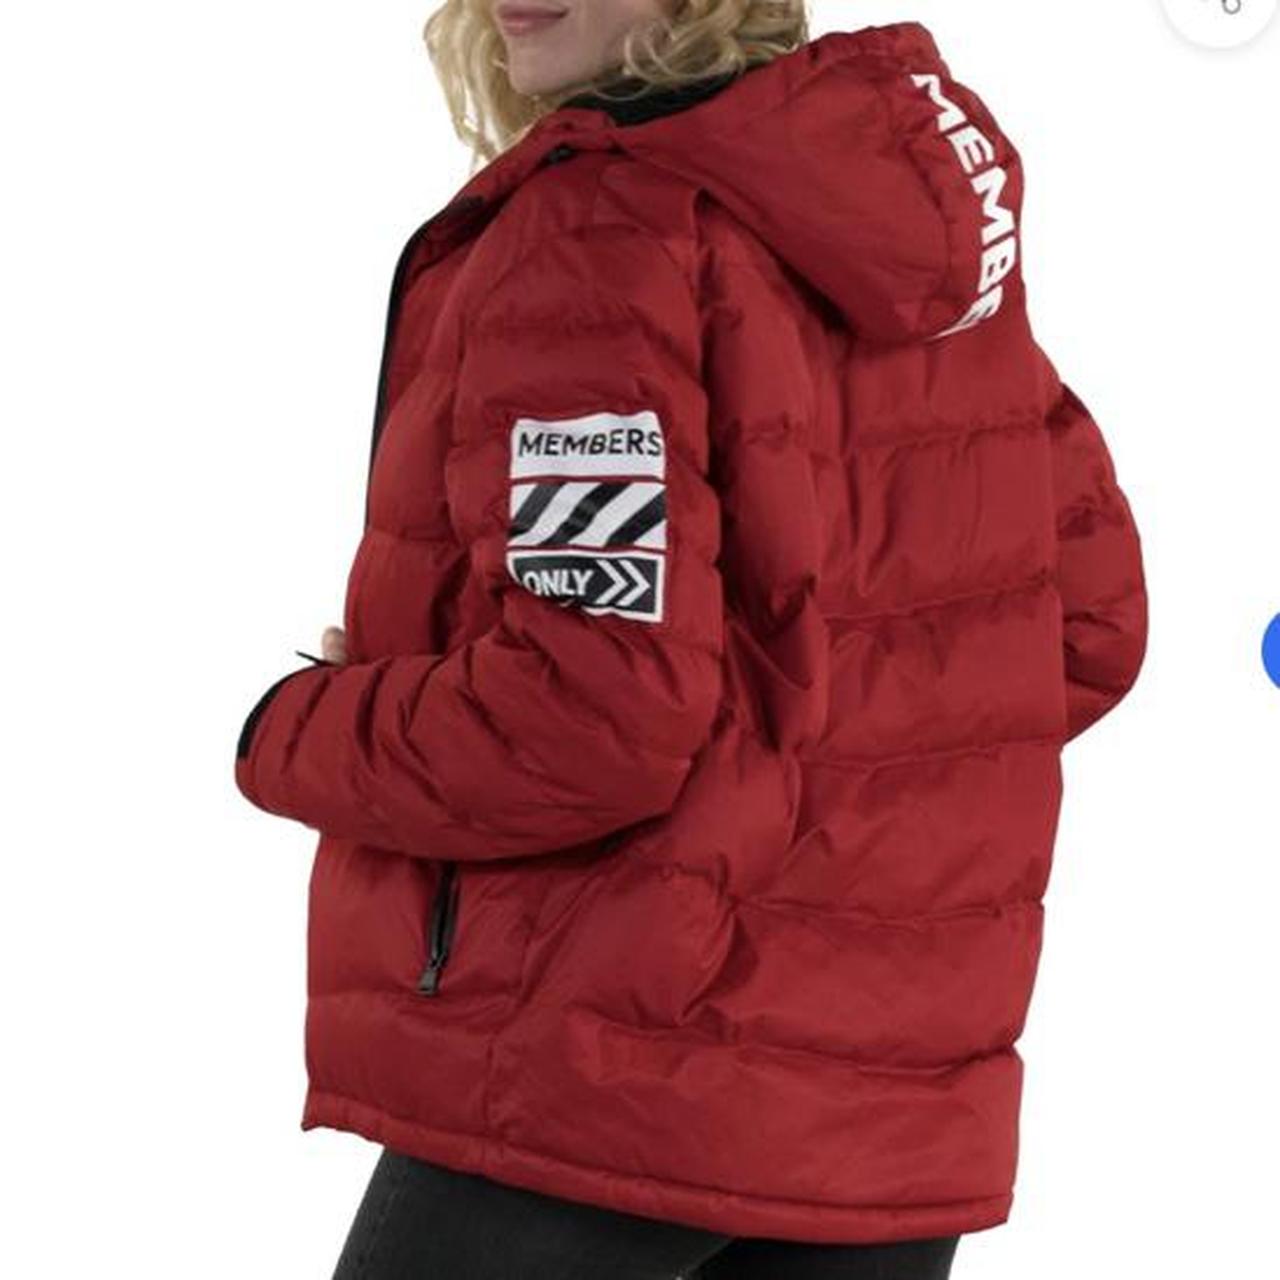 Product Image 2 - members only red puffer coat
FREE